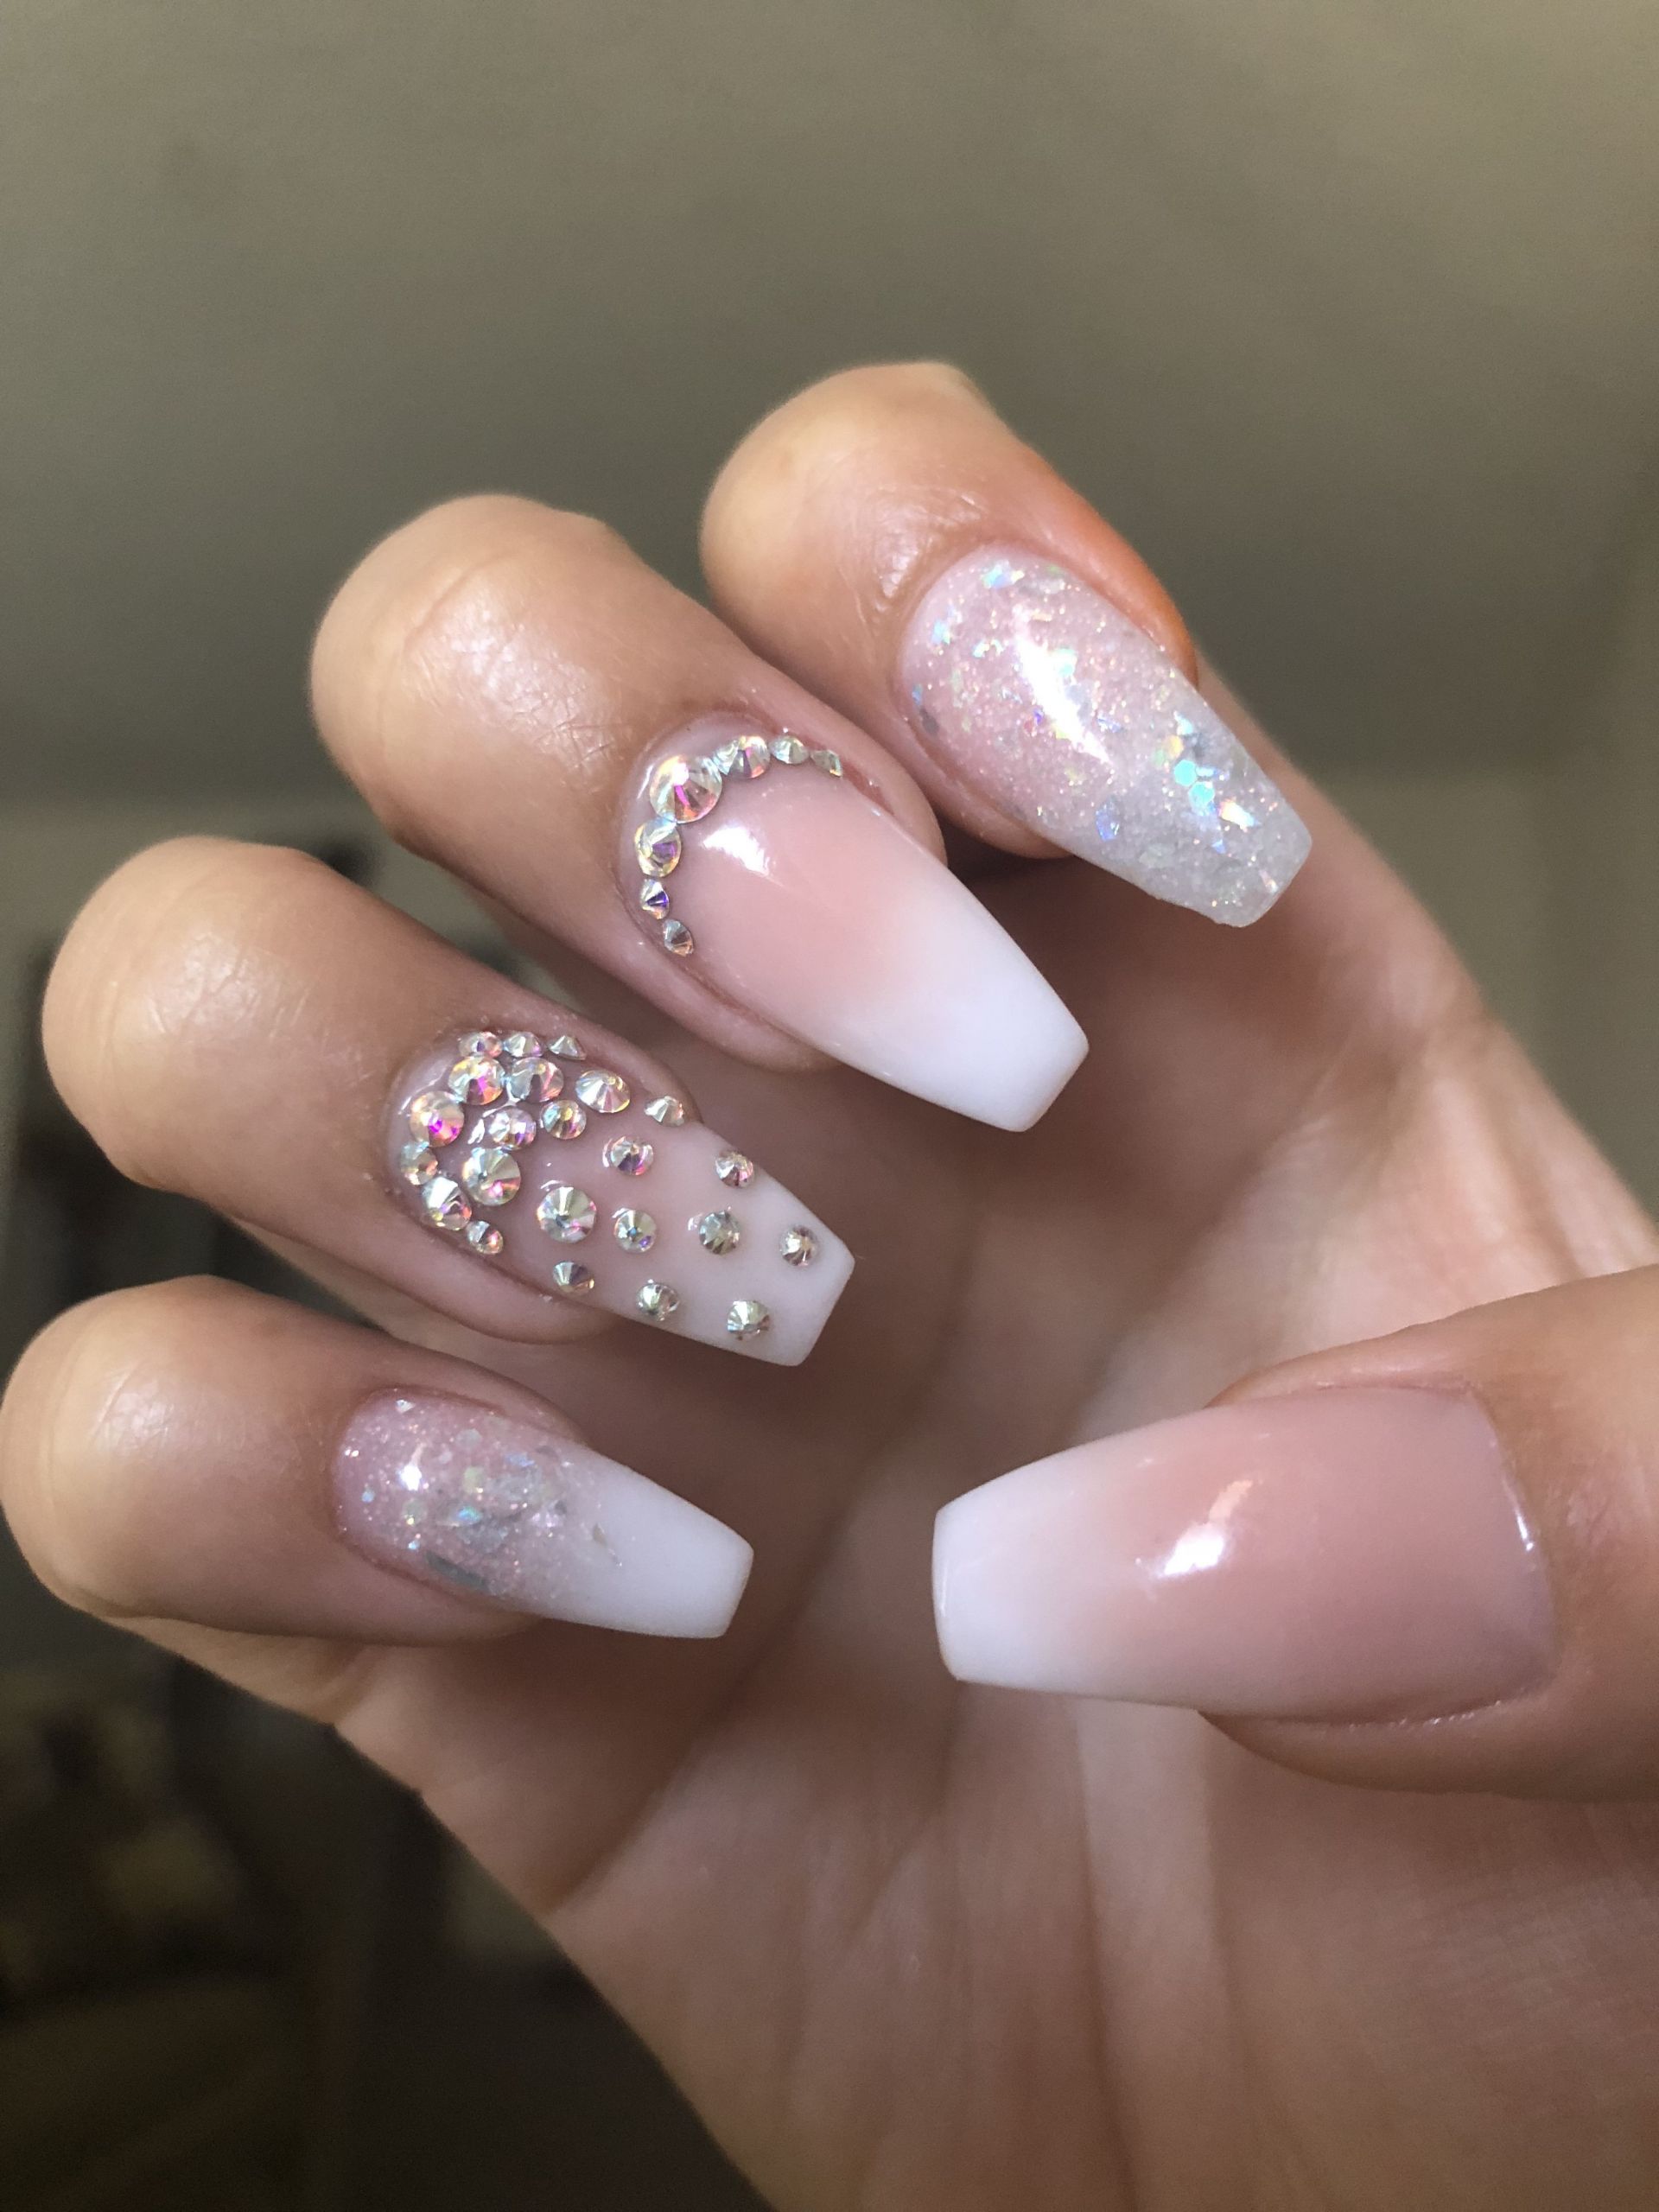 French Ombre Nails With Glitter
 French ombré coffin shaped nails with rhinestone & glitter